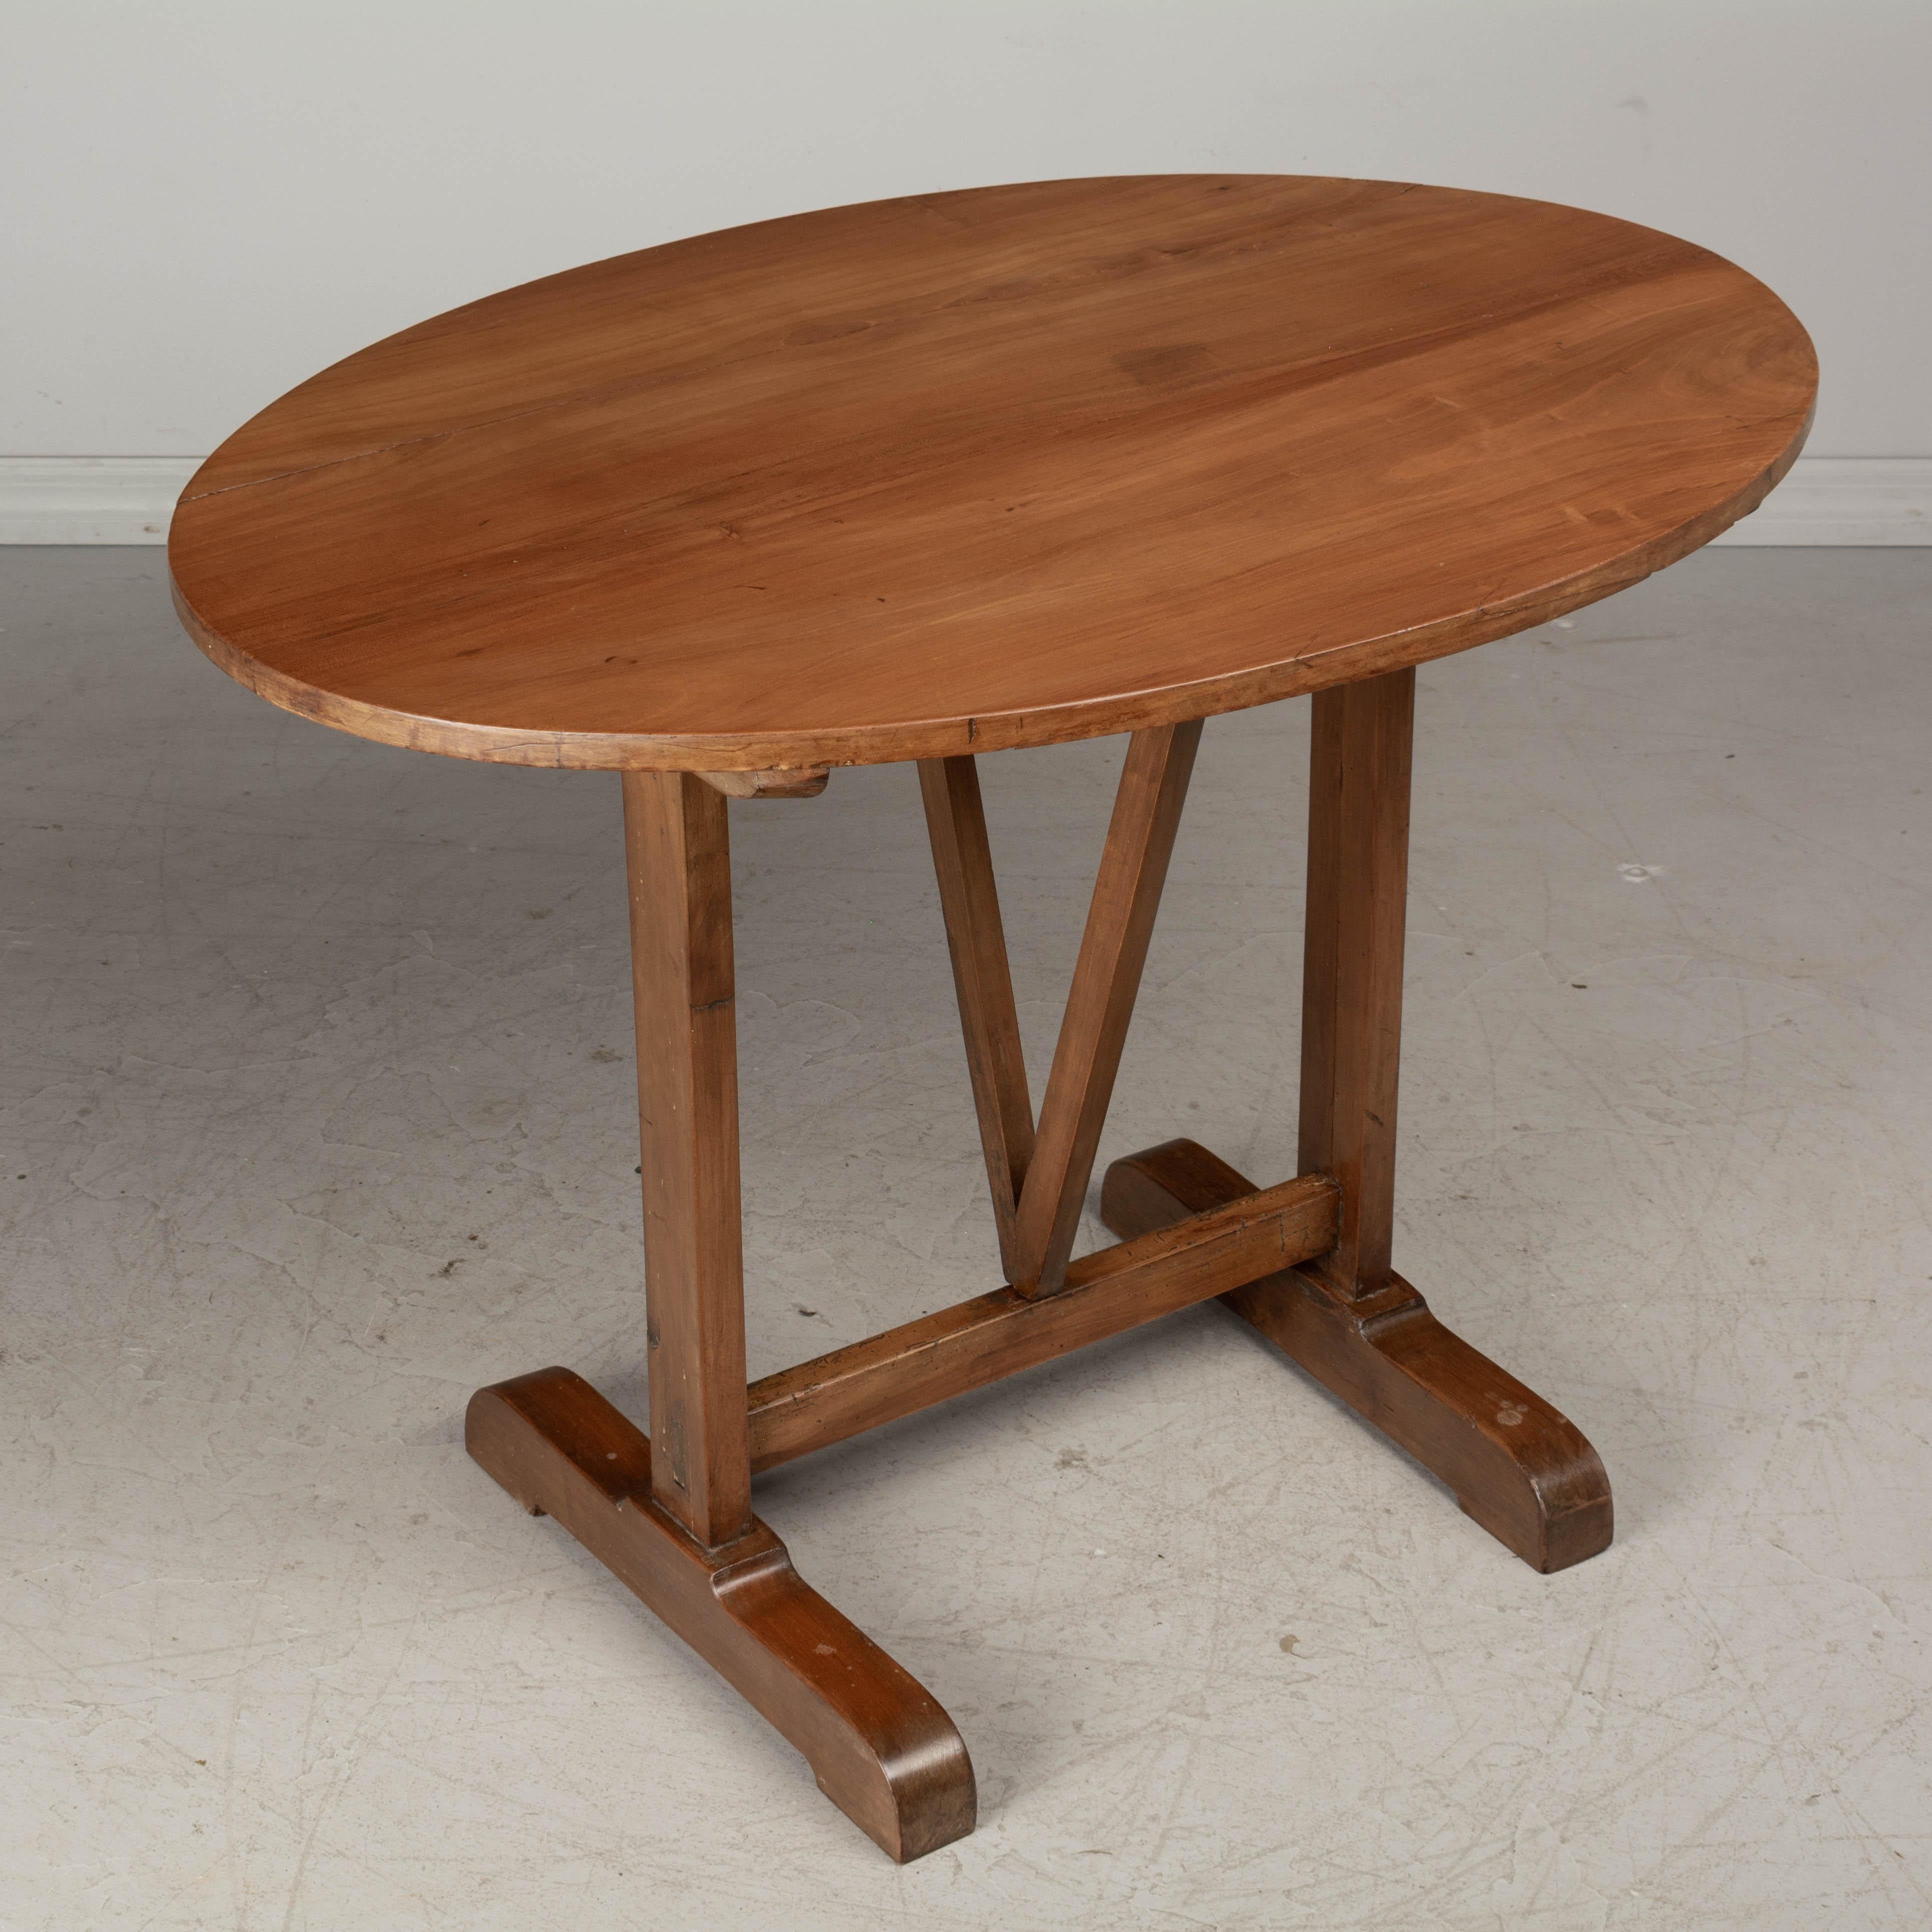 A French oval tilt-top side table made of solid cherry wood. Waxed patina. 
Overall dimensions when opened flat 39